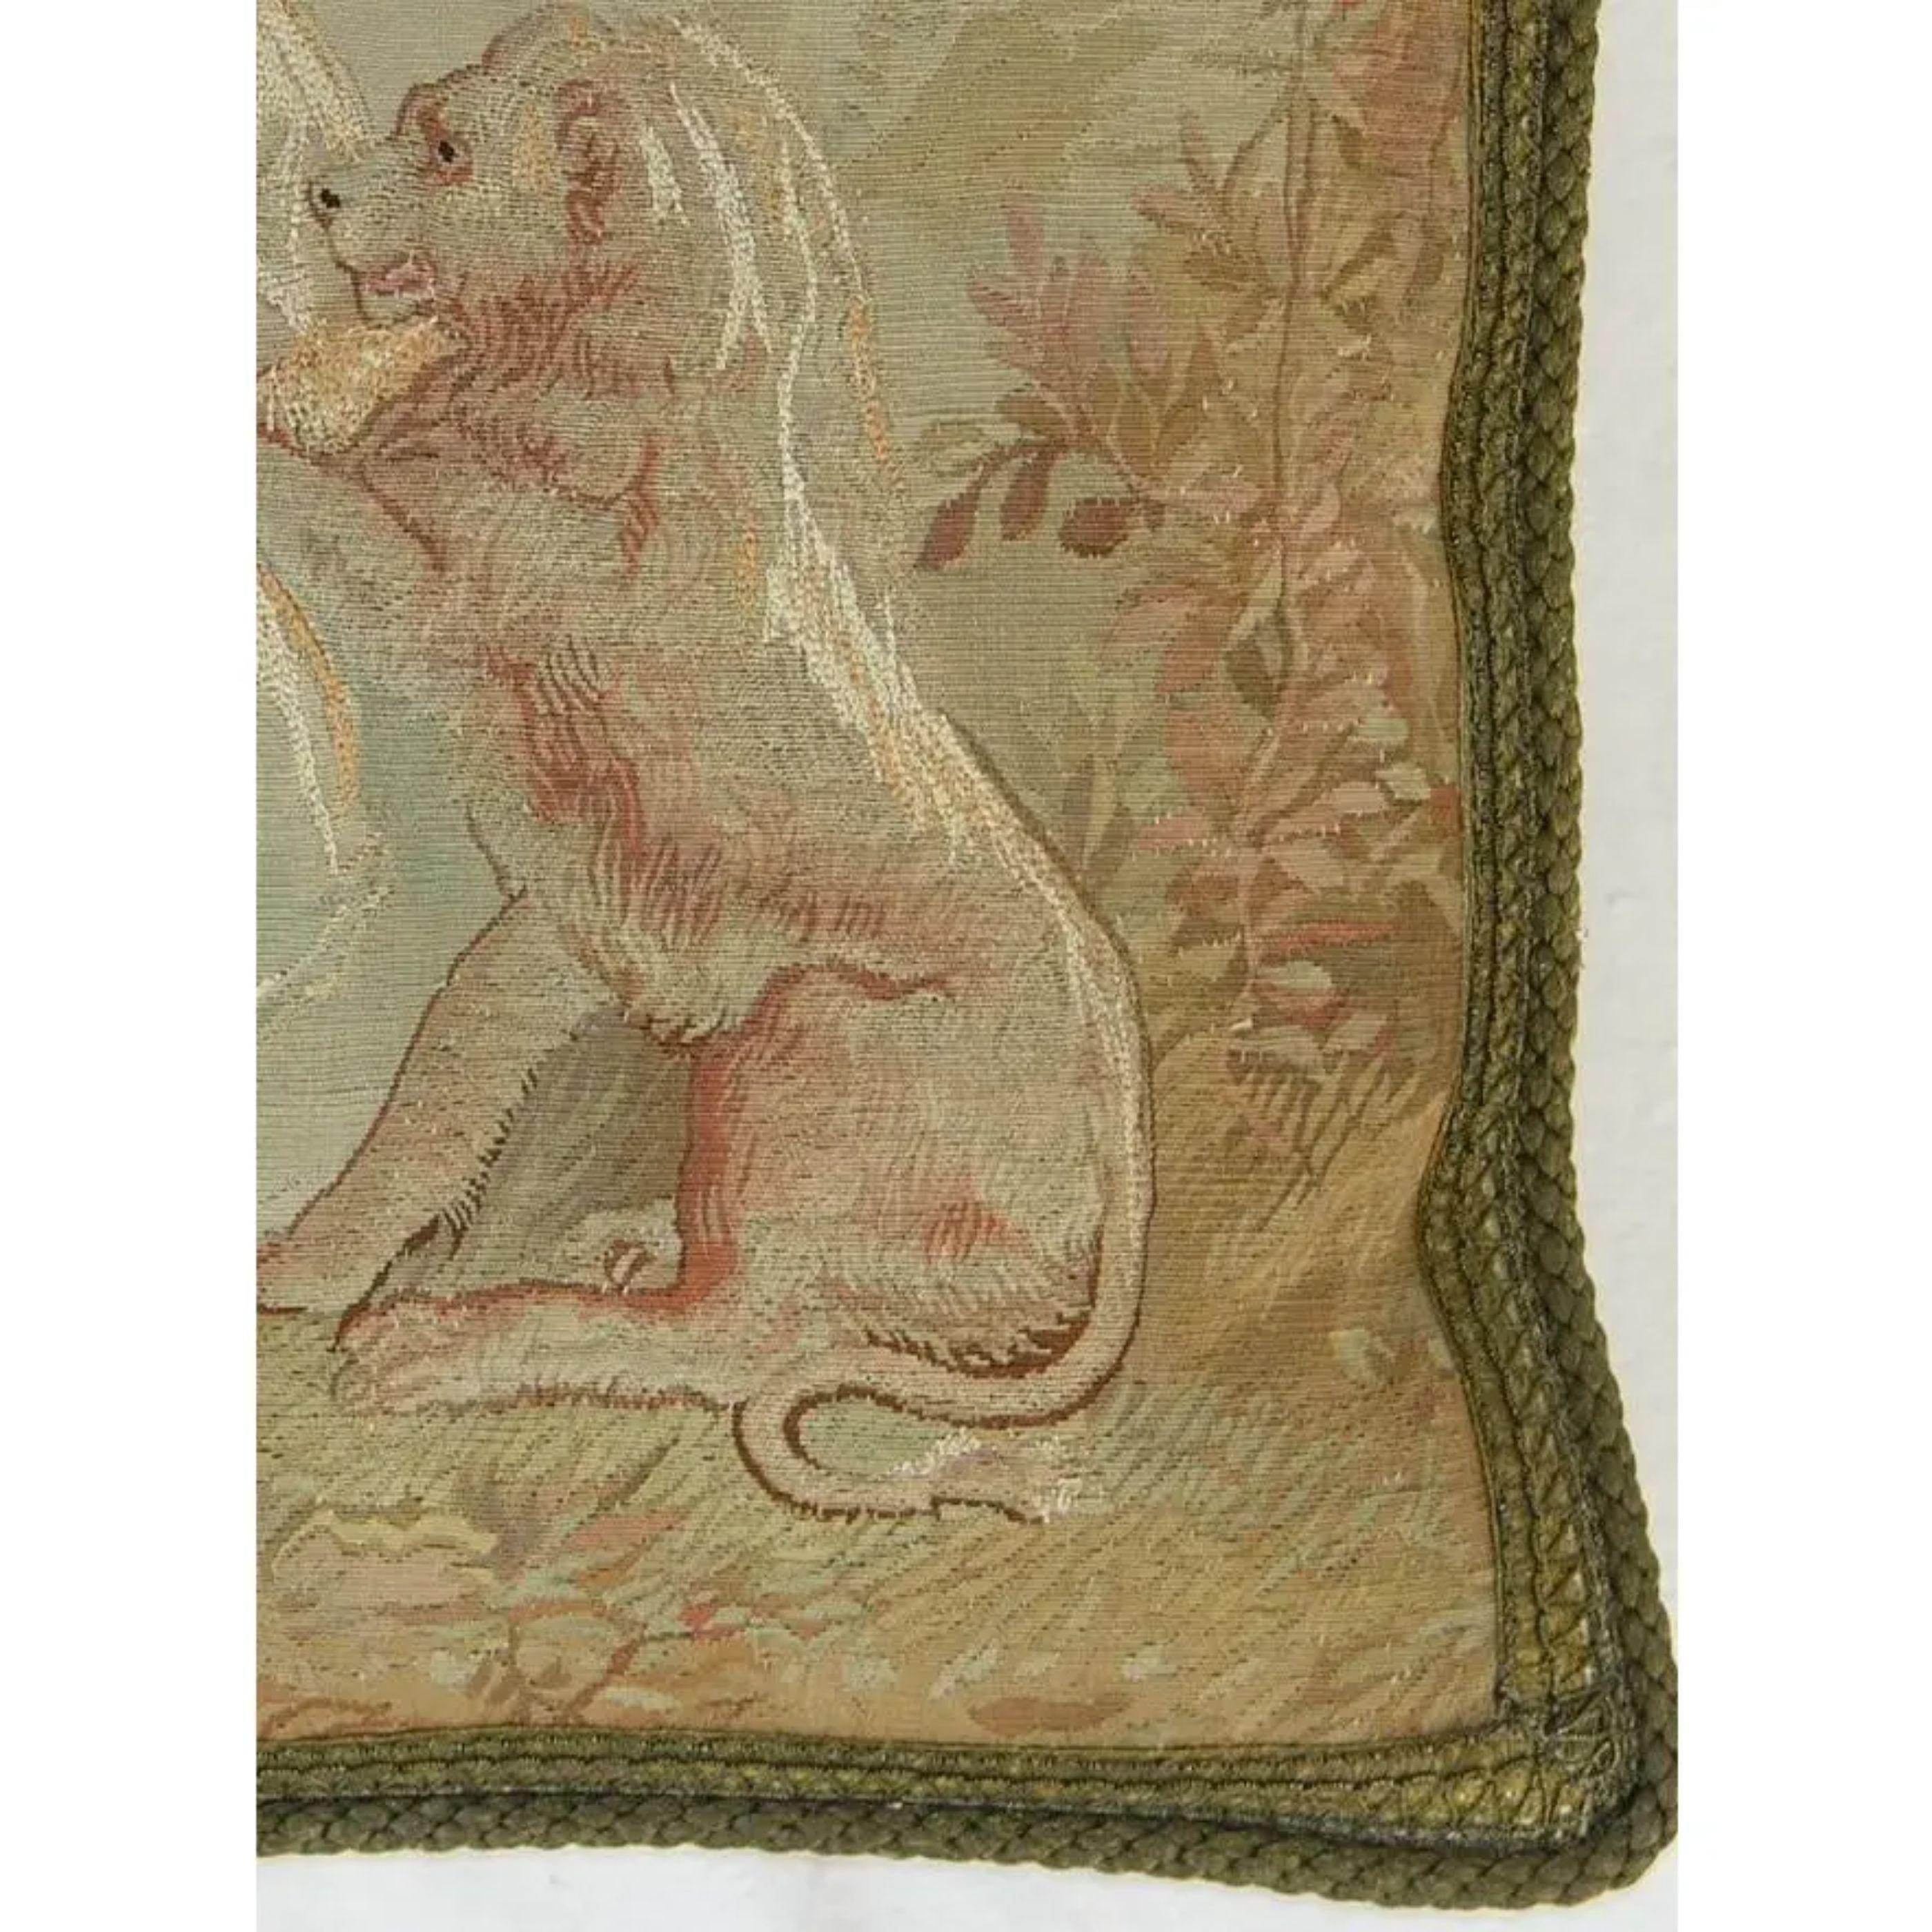 Mid-18th century antique French Aubusson tapestry pillow. 18'' x 20'' inches. Stylish and decorative, luxury, handmade, made out of wool. Lion with the lady design.

